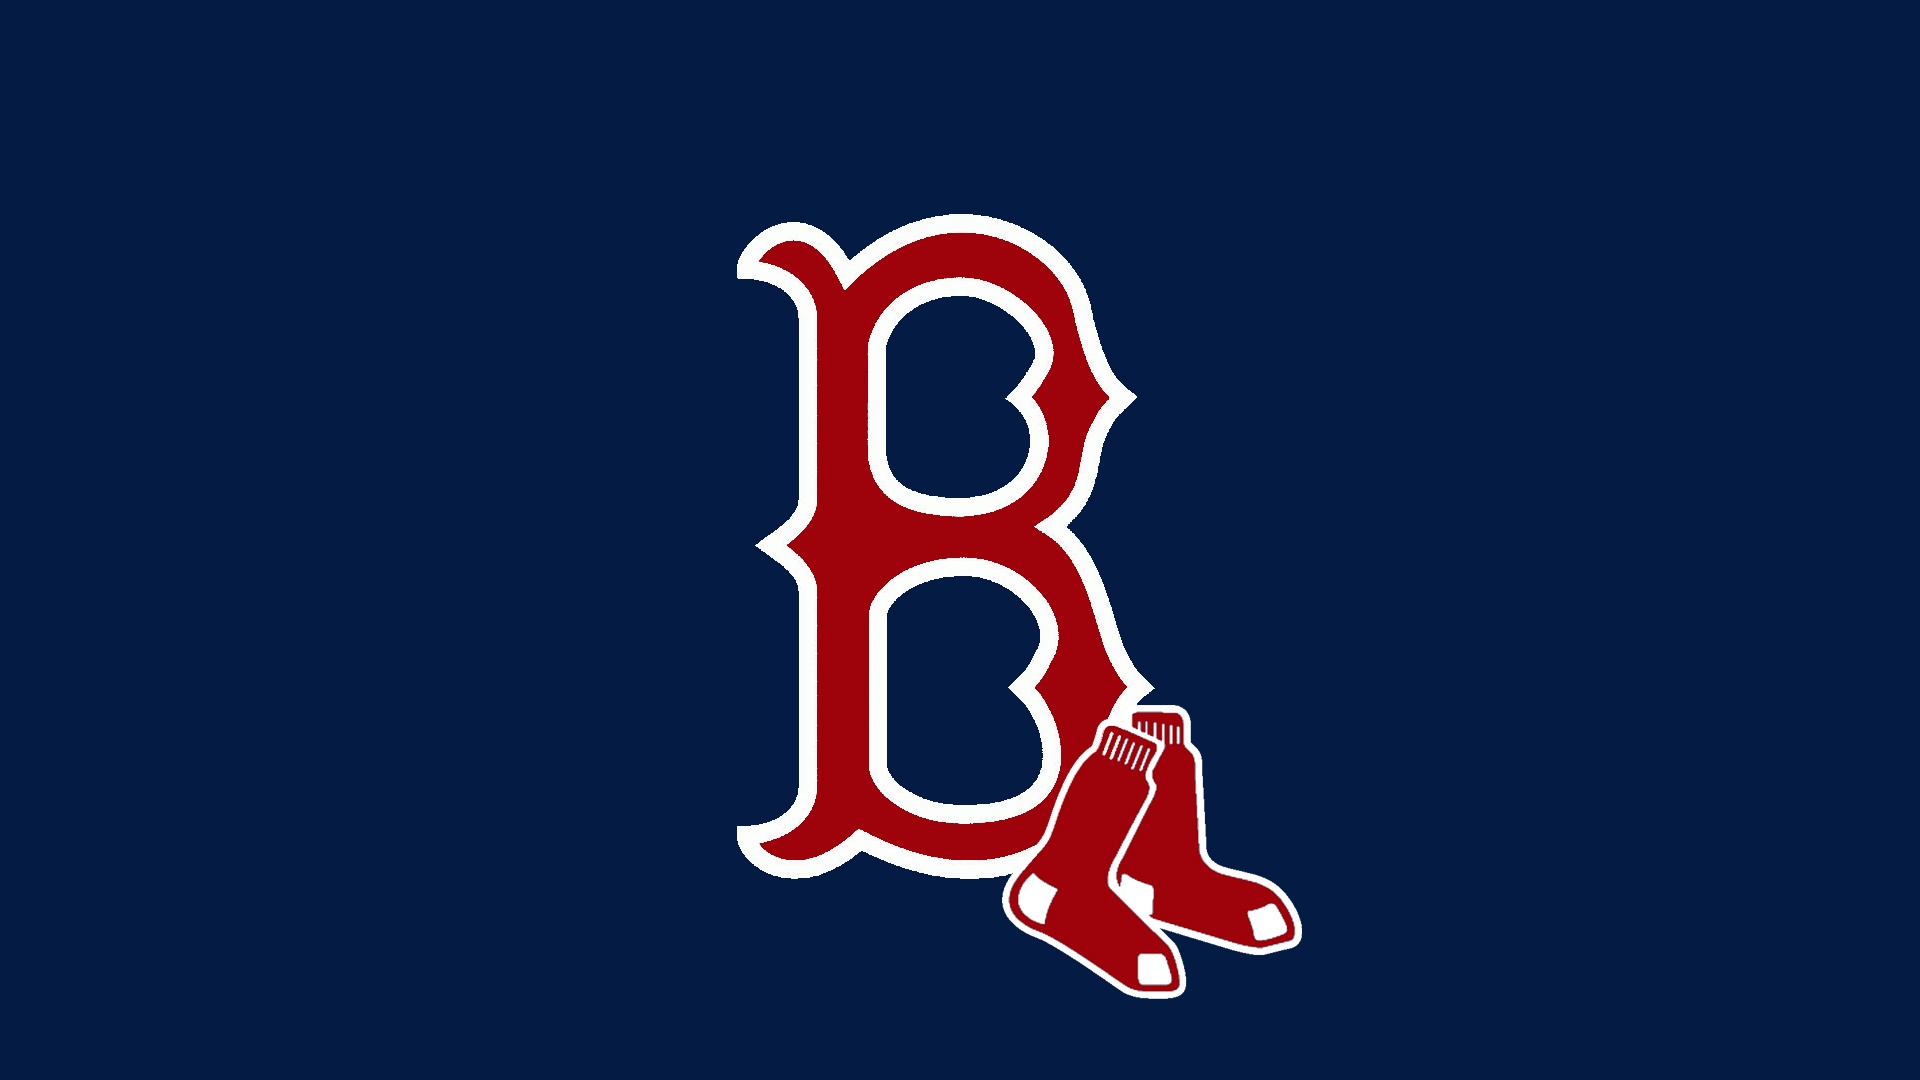 Free Boston Red Sox Logo Wallpaper, Download Free Boston Red Sox Logo  Wallpaper png images, Free ClipArts on Clipart Library